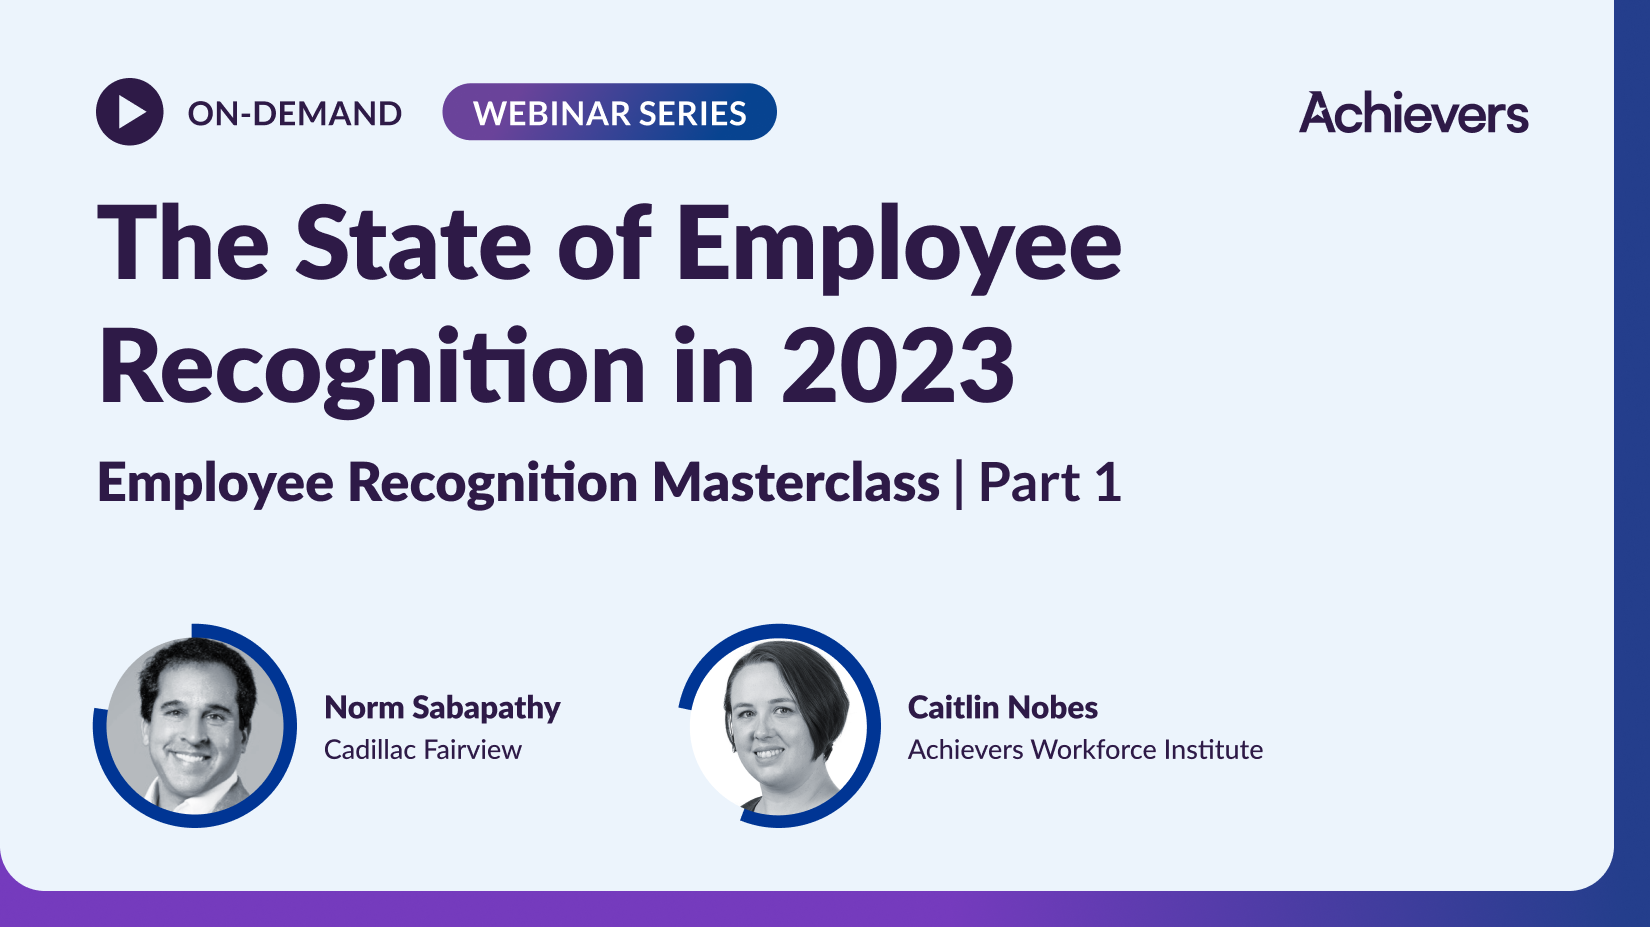 The State of Employee Recognition in 2023